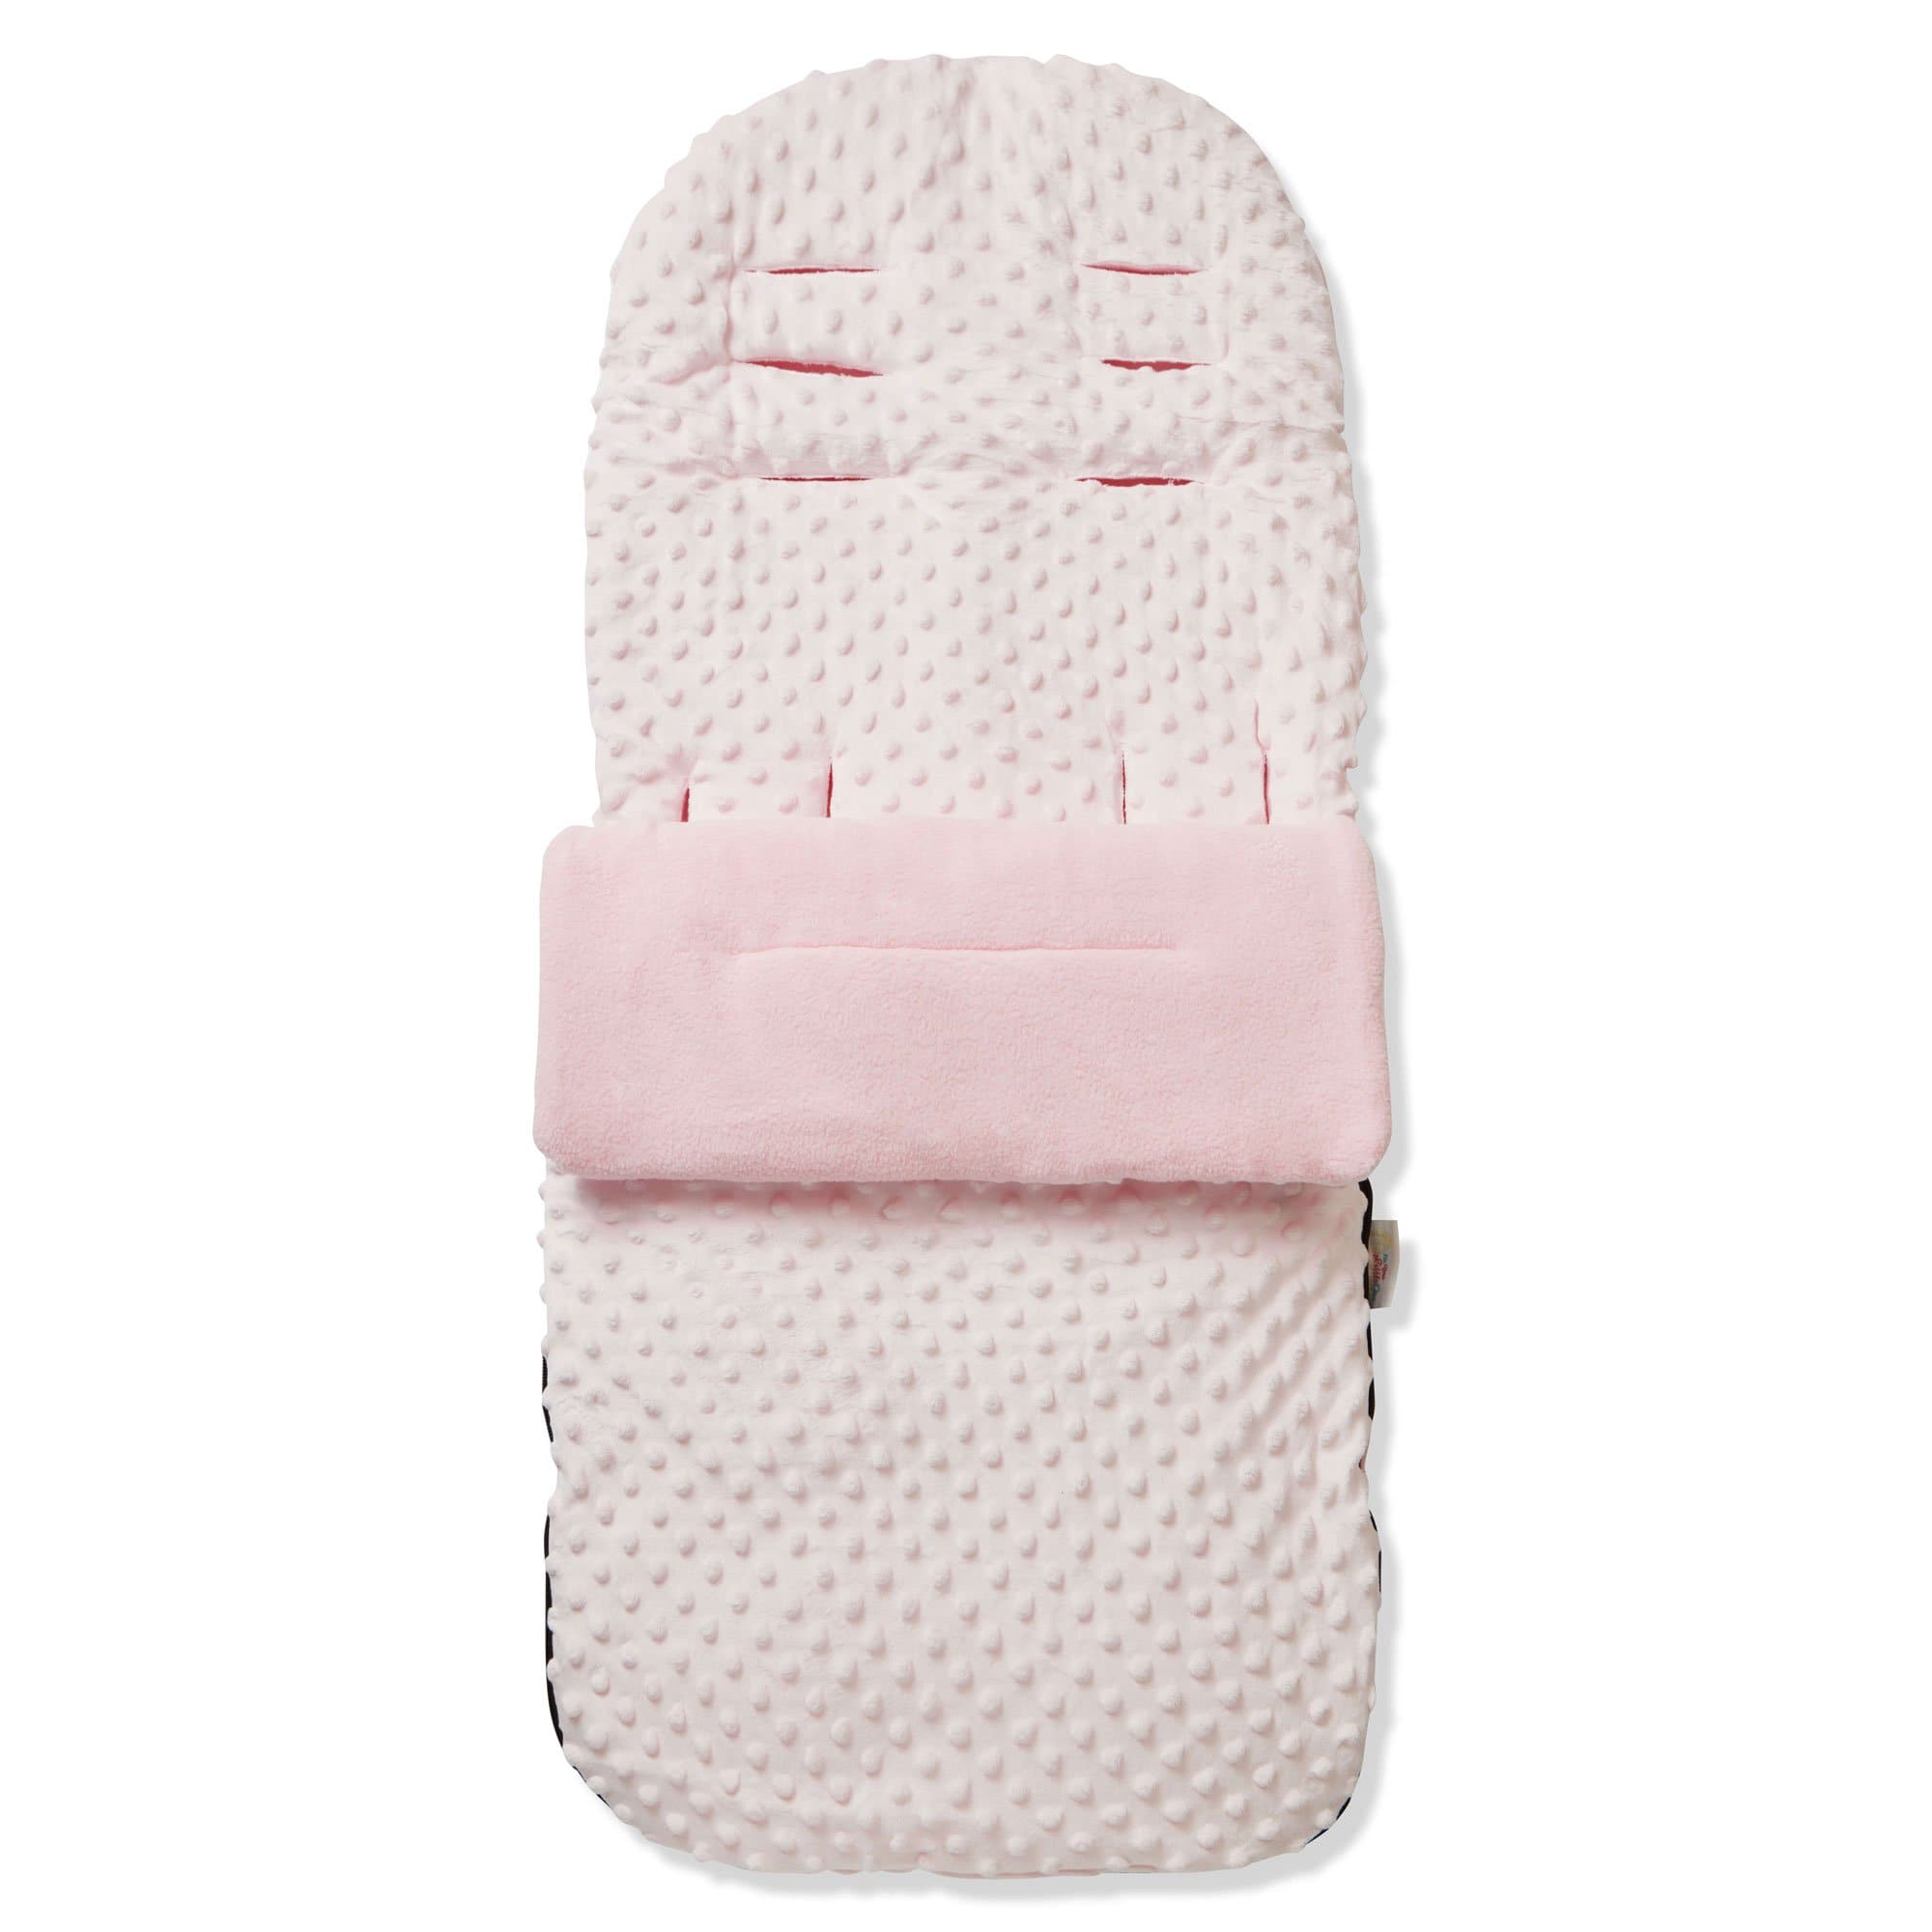 Dimple Footmuff / Cosy Toes Compatible with Recaro - For Your Little One